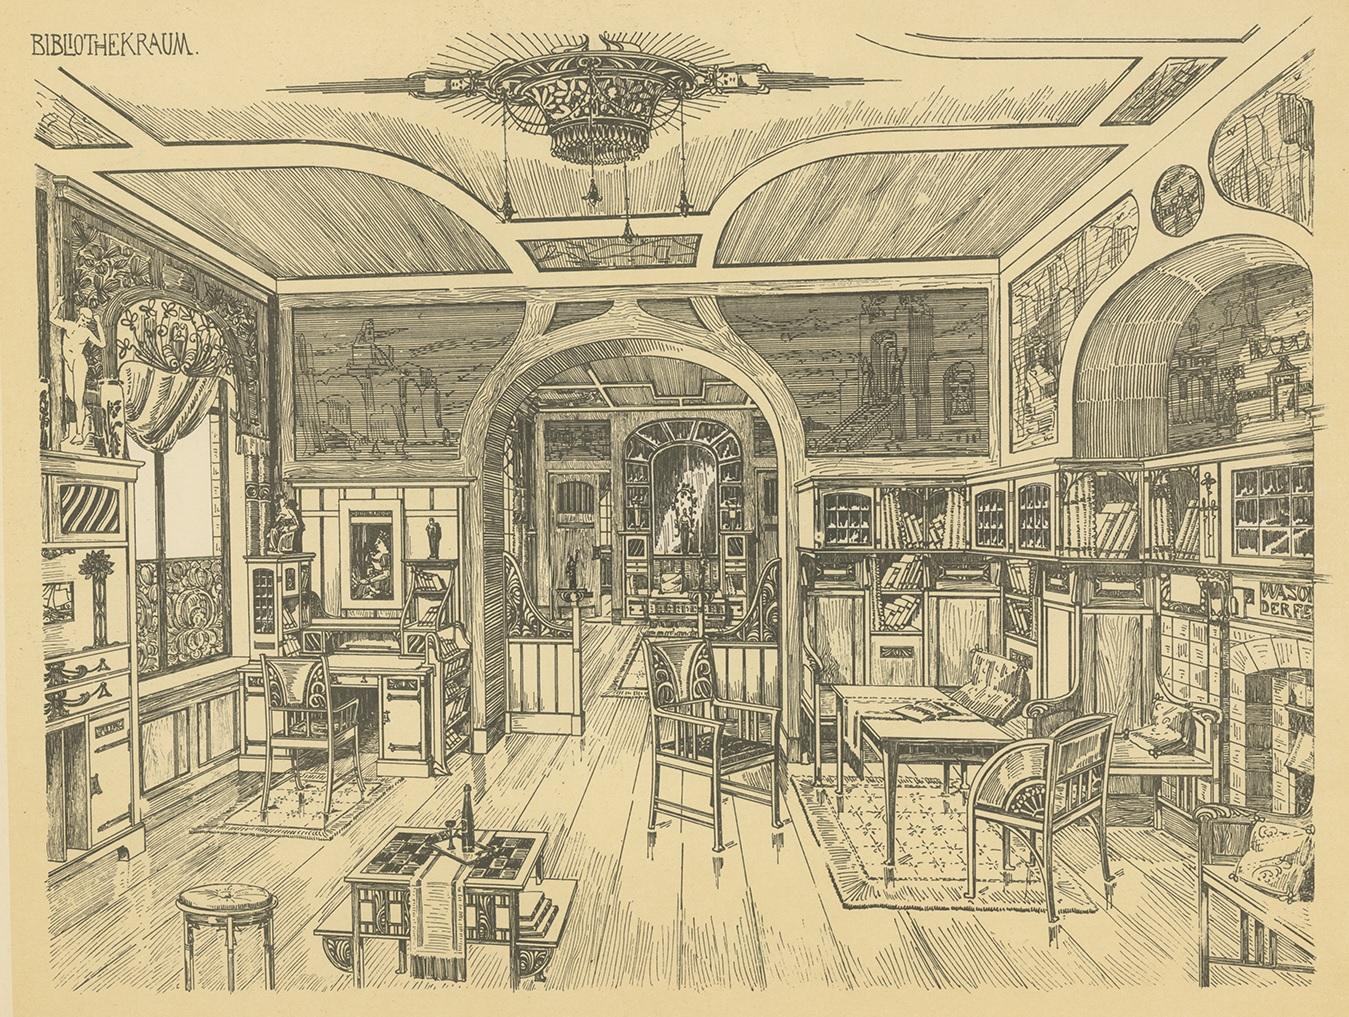 Antique print titled 'Bibliothekraum'. 

Lithograph of a library. This print originates from 'Det Moderna Hemmet' by Johannes Kramer. Published by Ferdinand Hey'l, circa 1910.